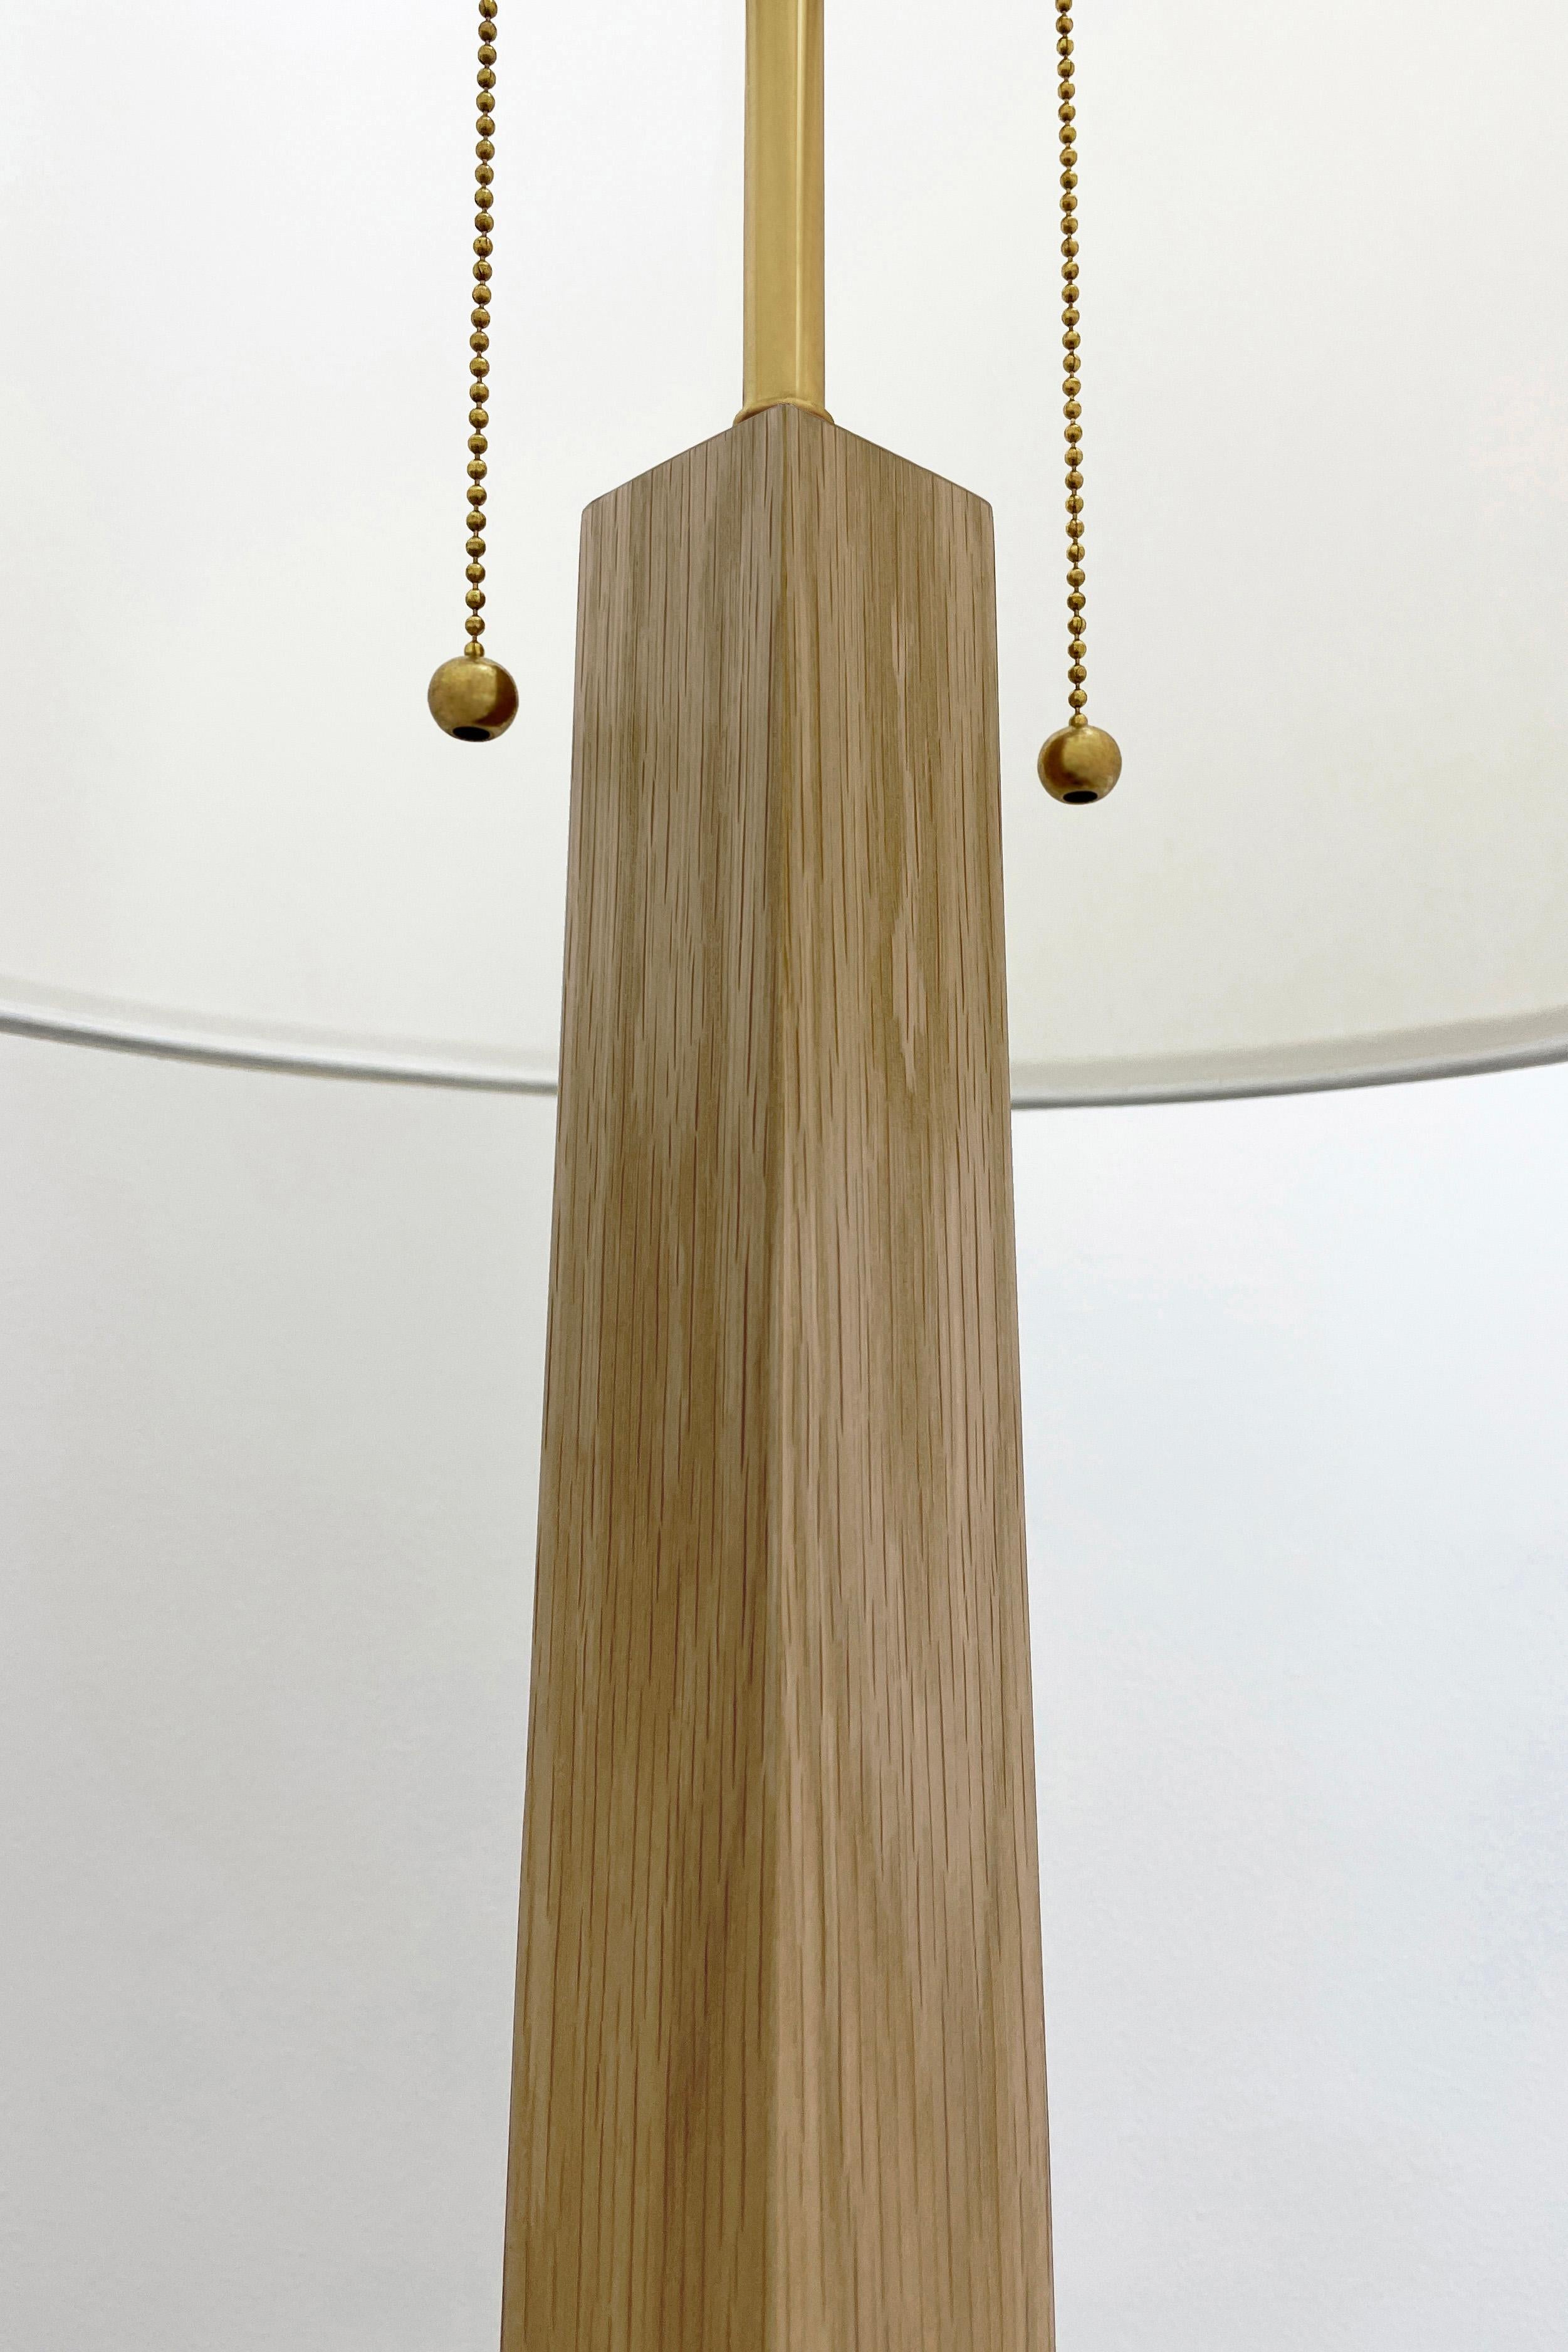 Minimalist Contemporary Forno Floor Lamp 002 in Oak by Orphan Work For Sale